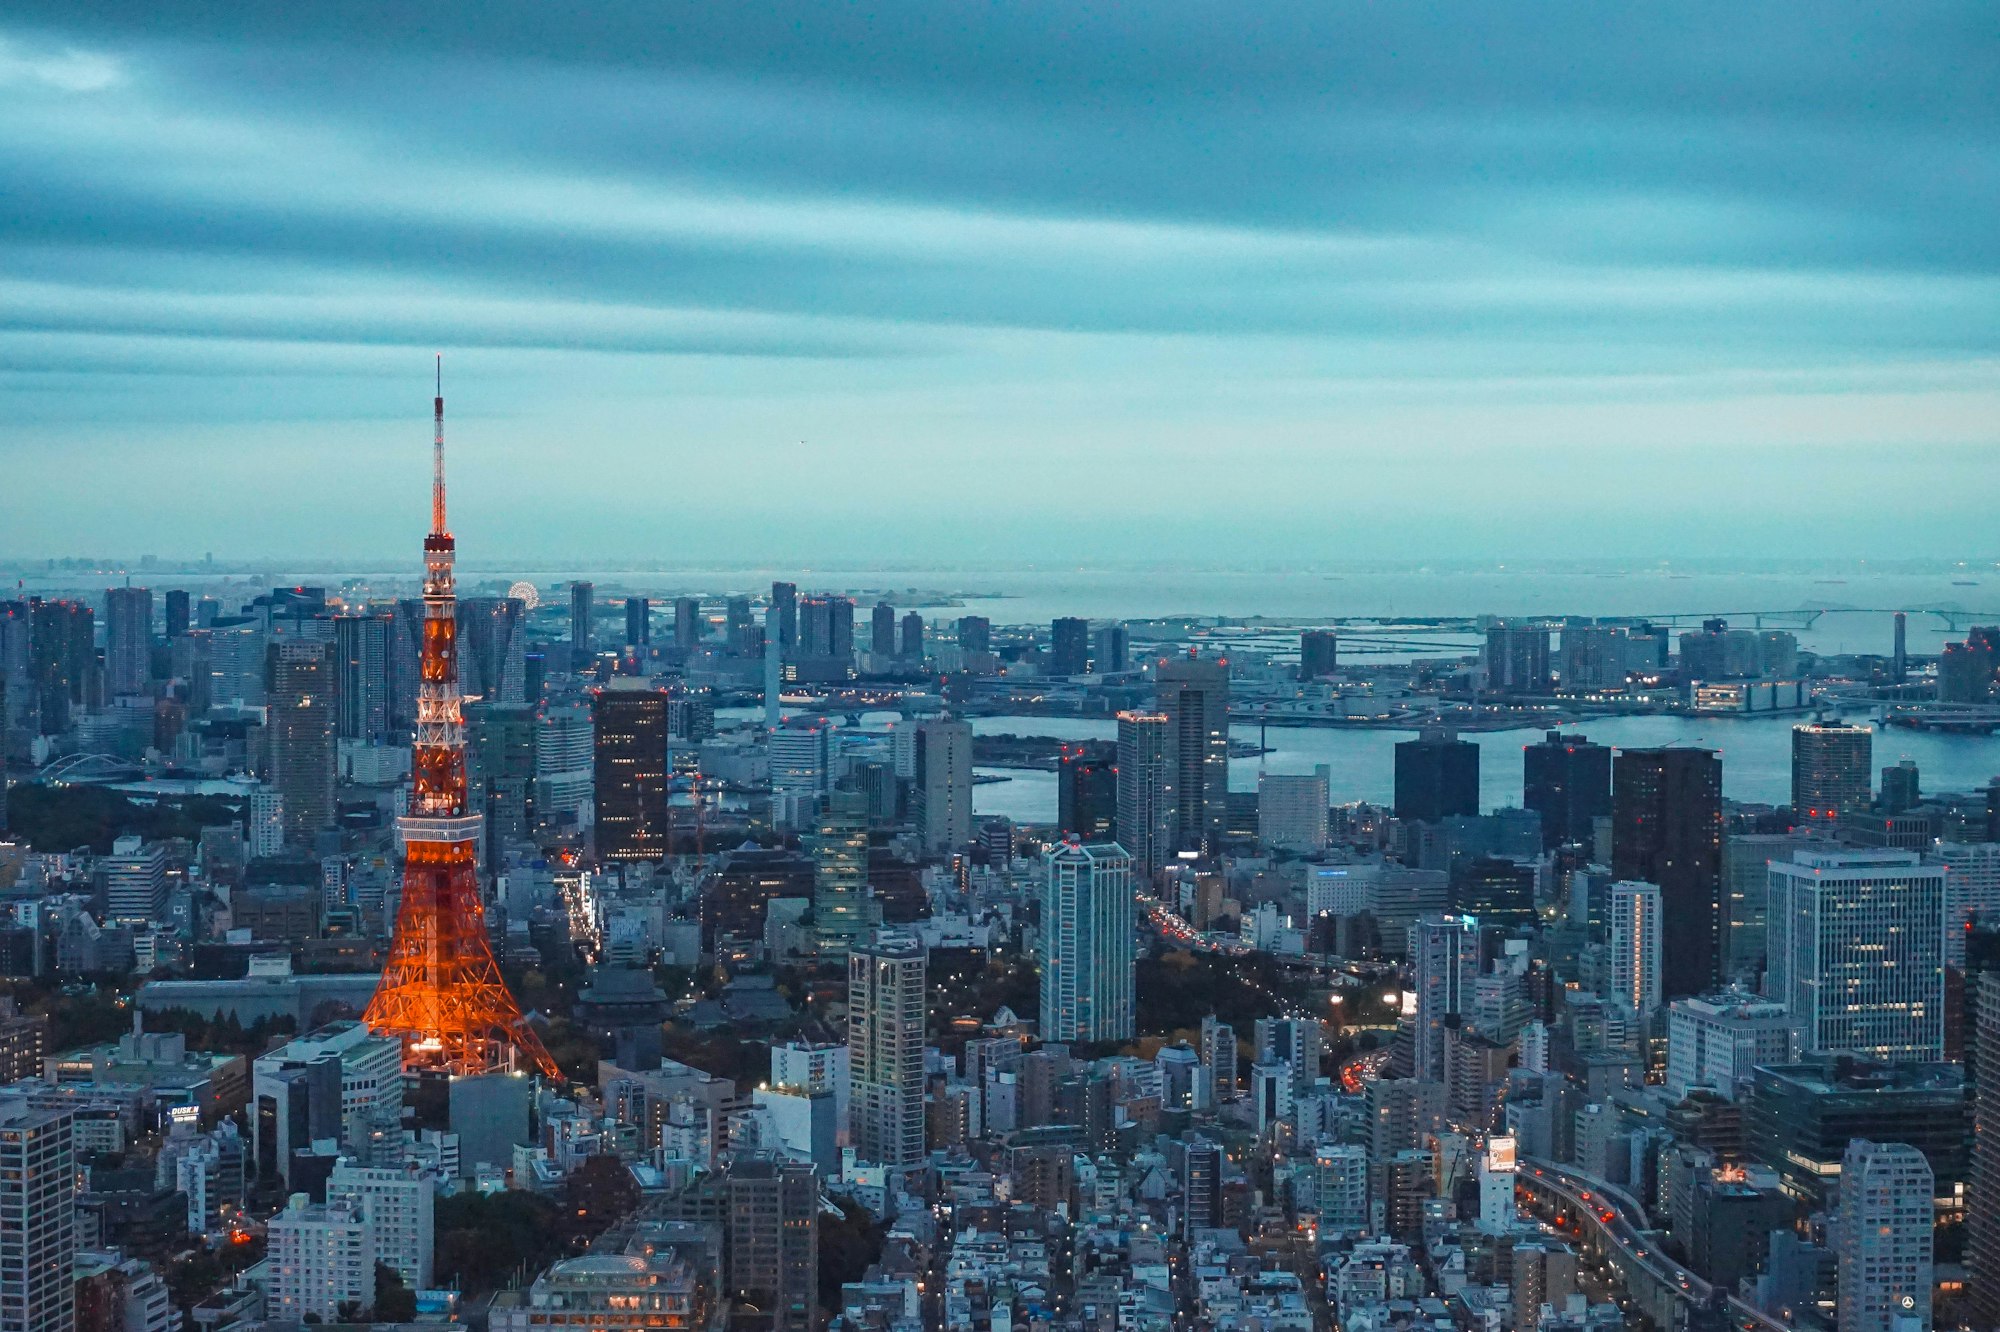 The best place to take a photo of the Tokyo Tower is at the viewing deck of Mori building in Roponggi Hills